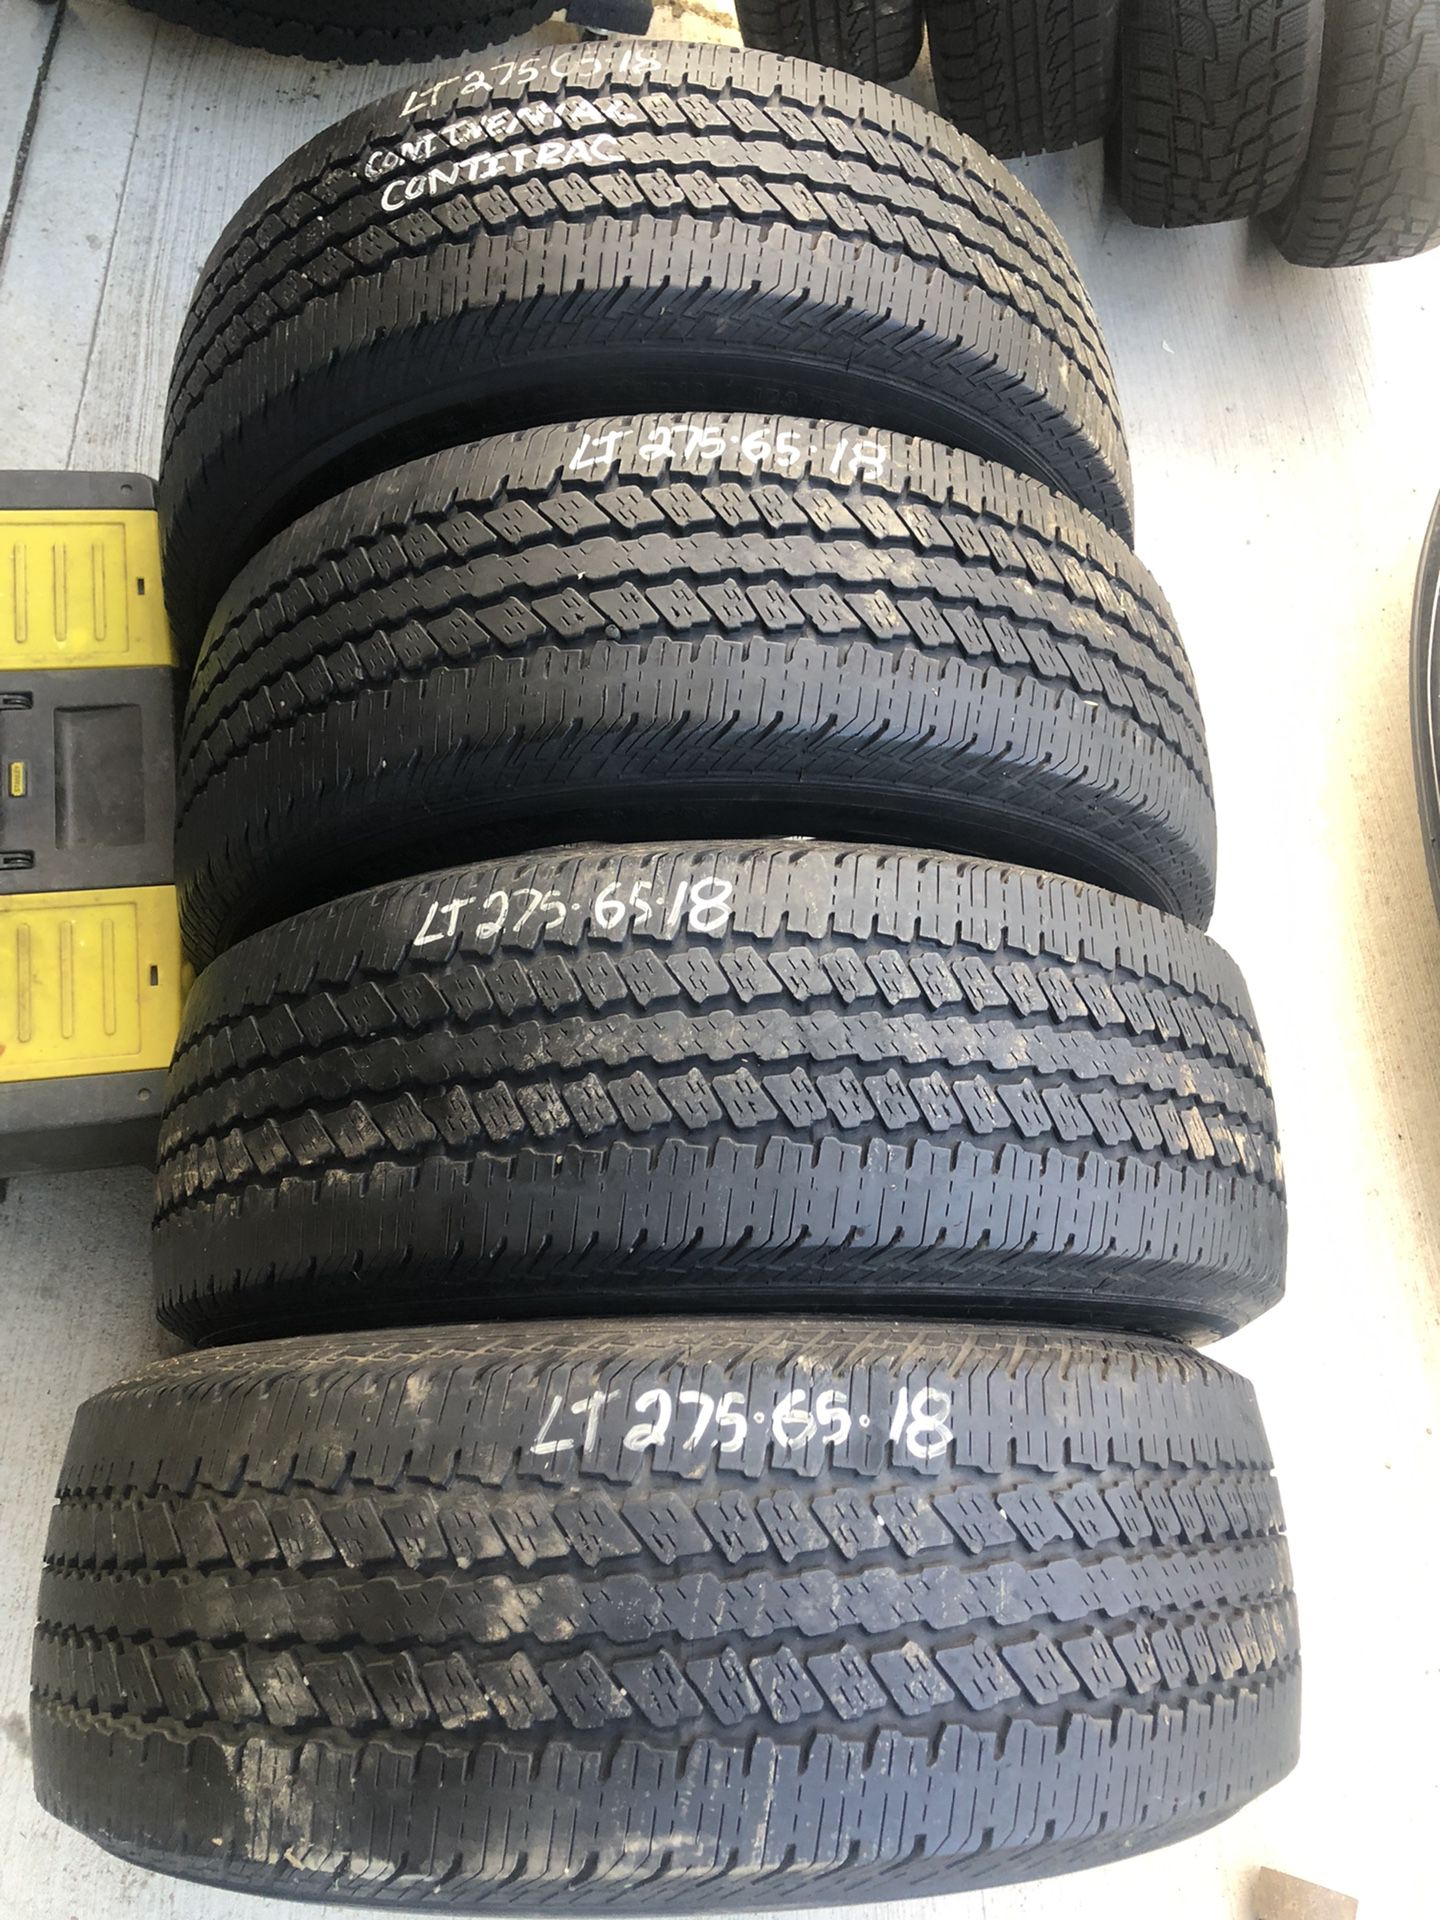 4 CONTINENTAL CONTITRAC LT275/65R18 GREAT TREAD RETAILS $1273 SELLING FOR ONLY $350